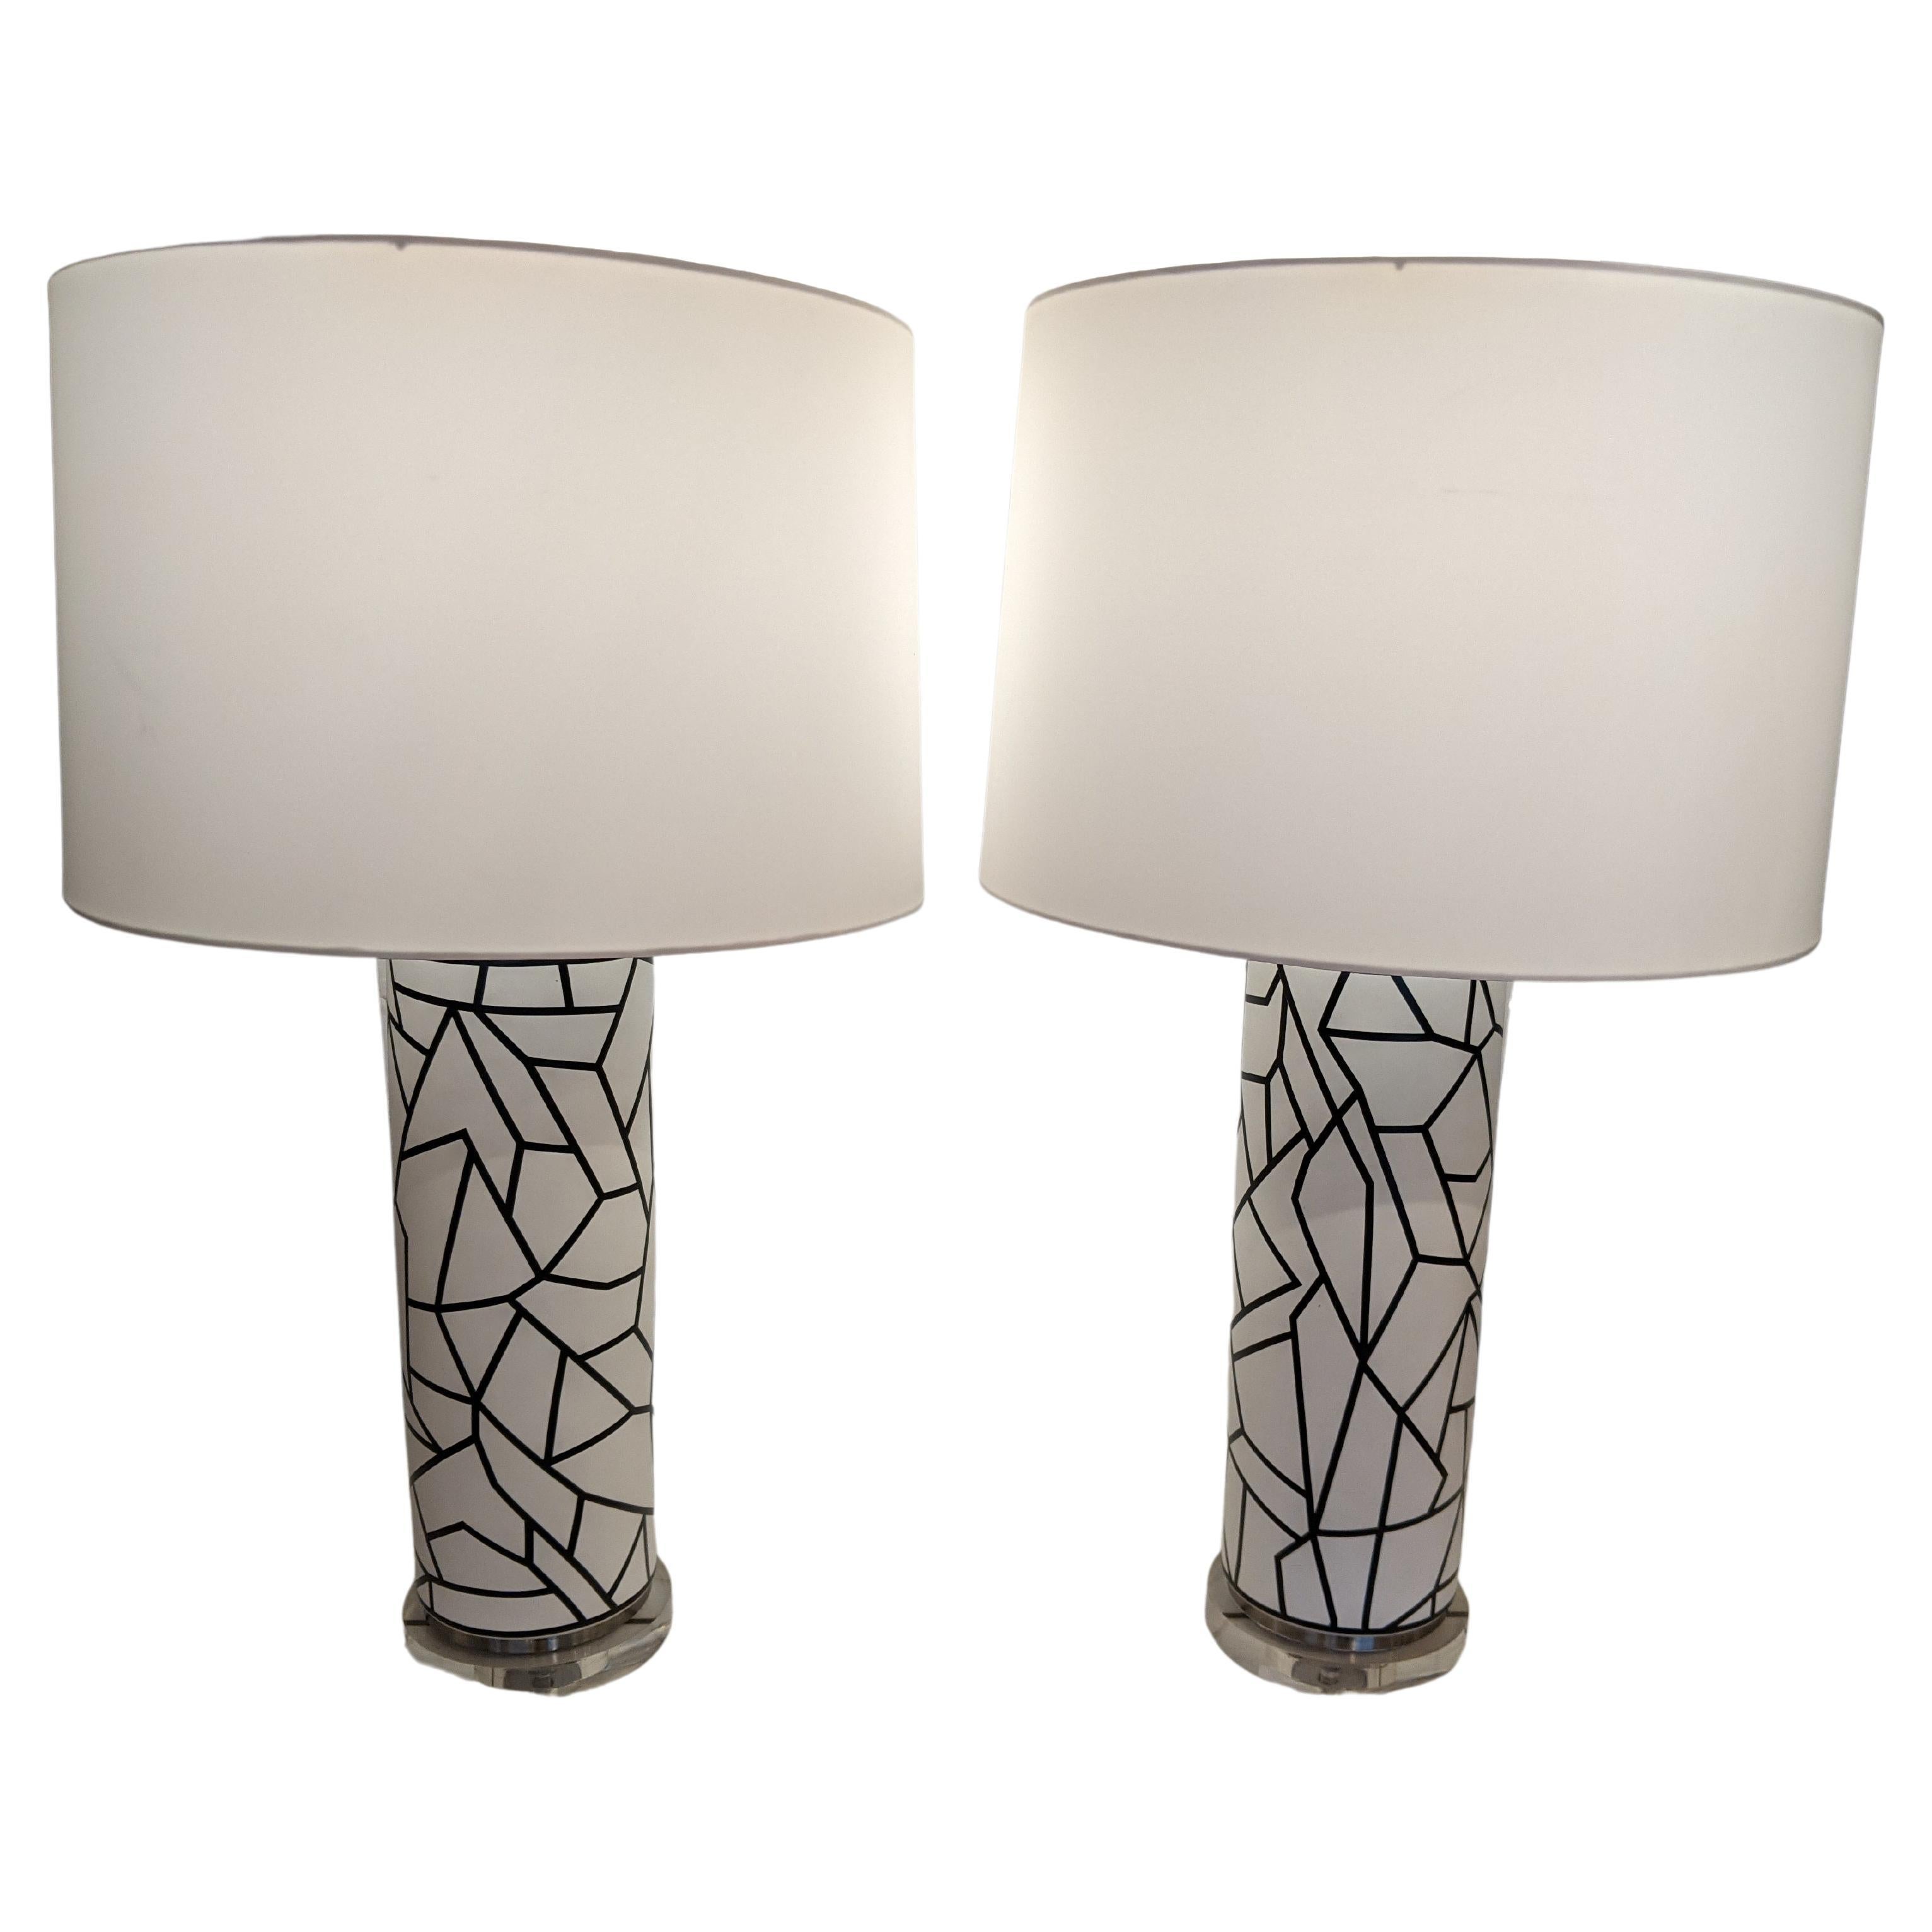 Cool Pair of Large Graphic Black and White Abstract Columnar Table Lamps For Sale